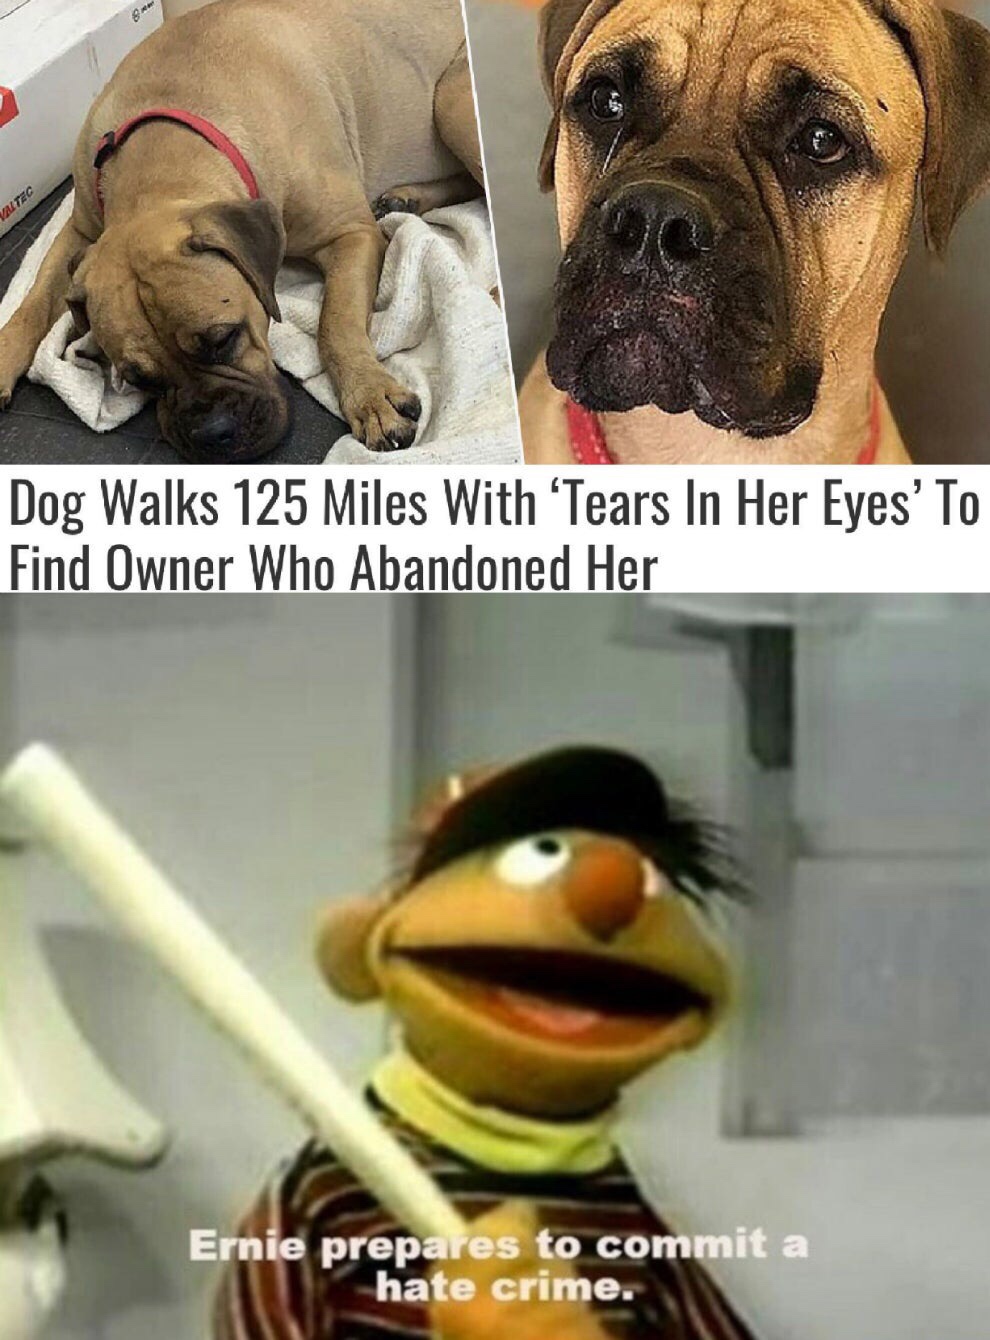 bert and ernie memes - Wtec Dog Walks 125 Miles With 'Tears In Her Eyes' To Find Owner Who Abandoned Her Ernie prepares to commit a hate crime.